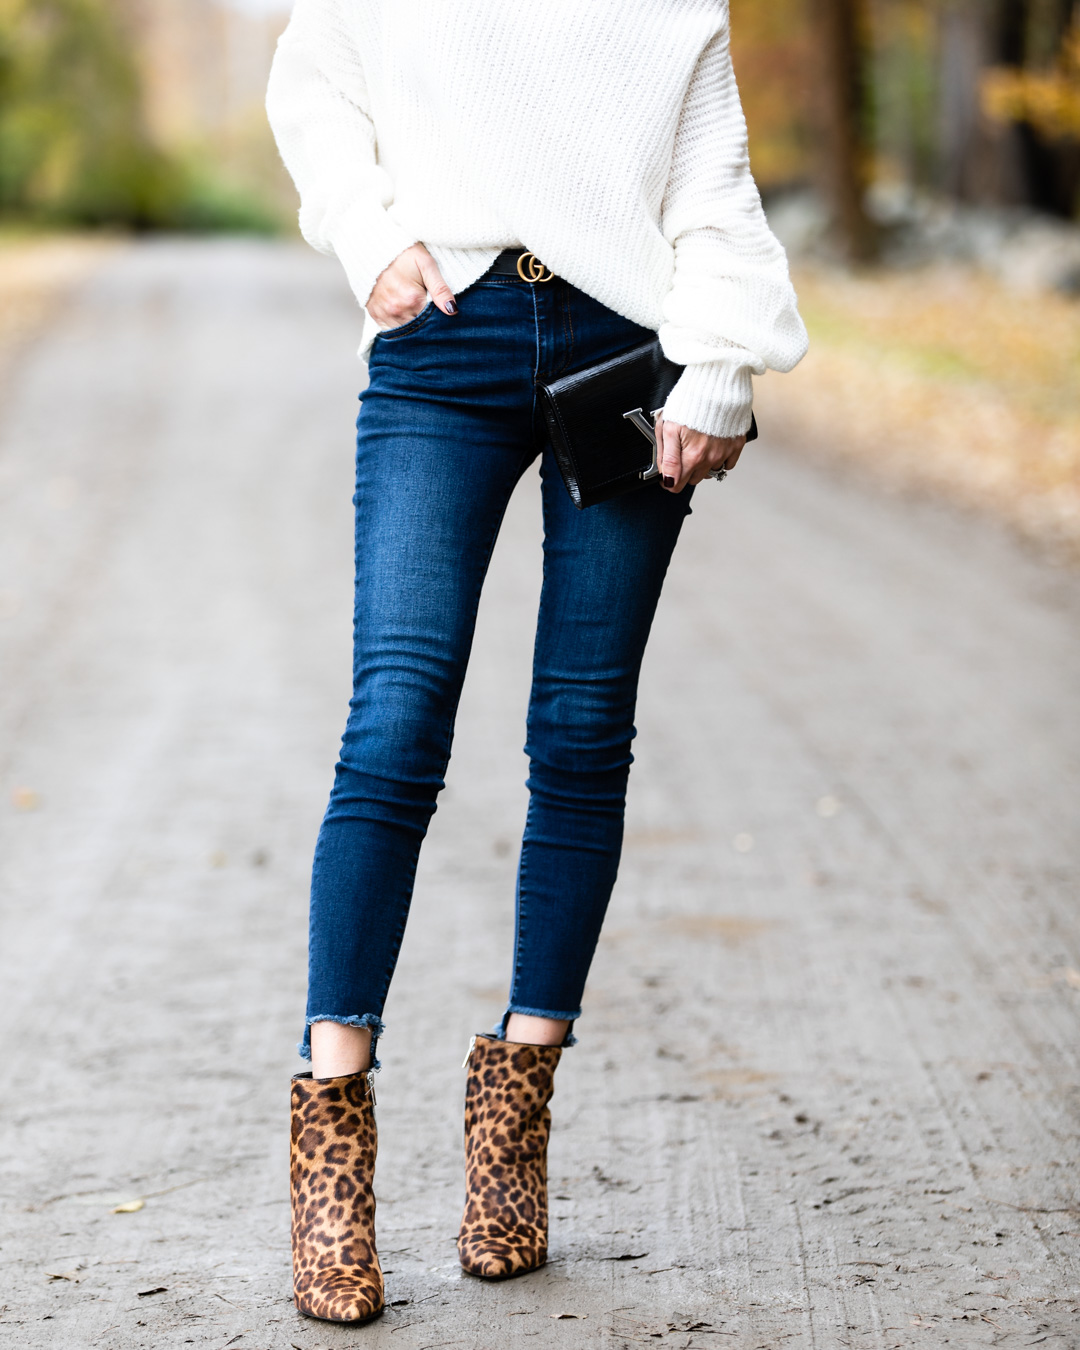 Casual Off the Shoulder Sweater & Leopard Booties